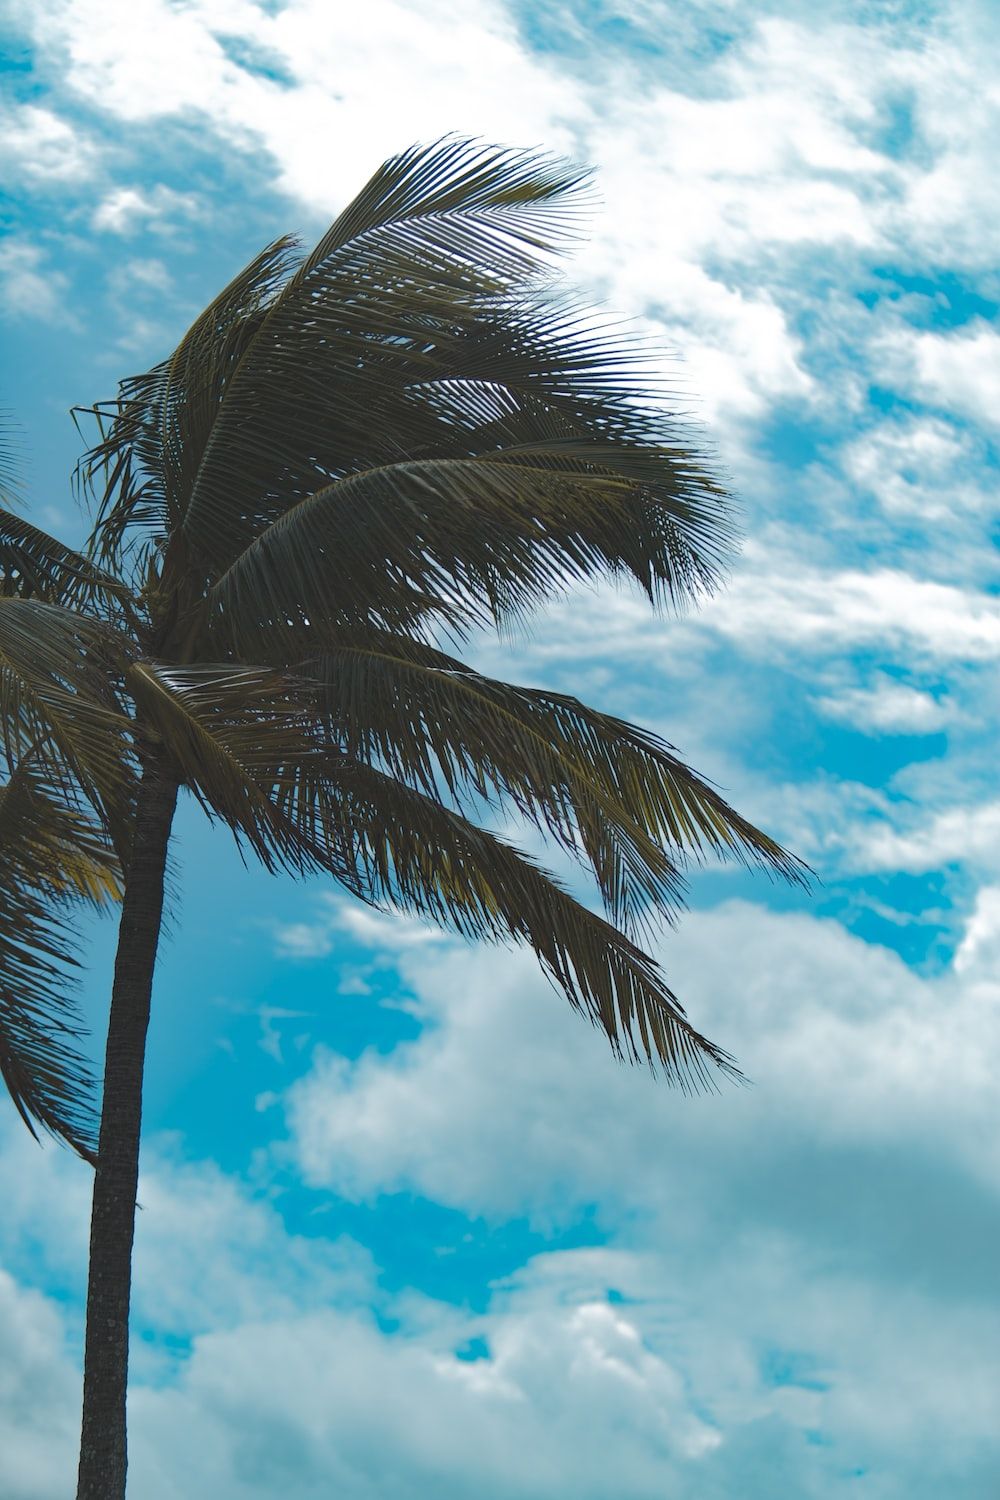 A palm tree blowing in the wind with a blue sky and clouds in the background - Florida